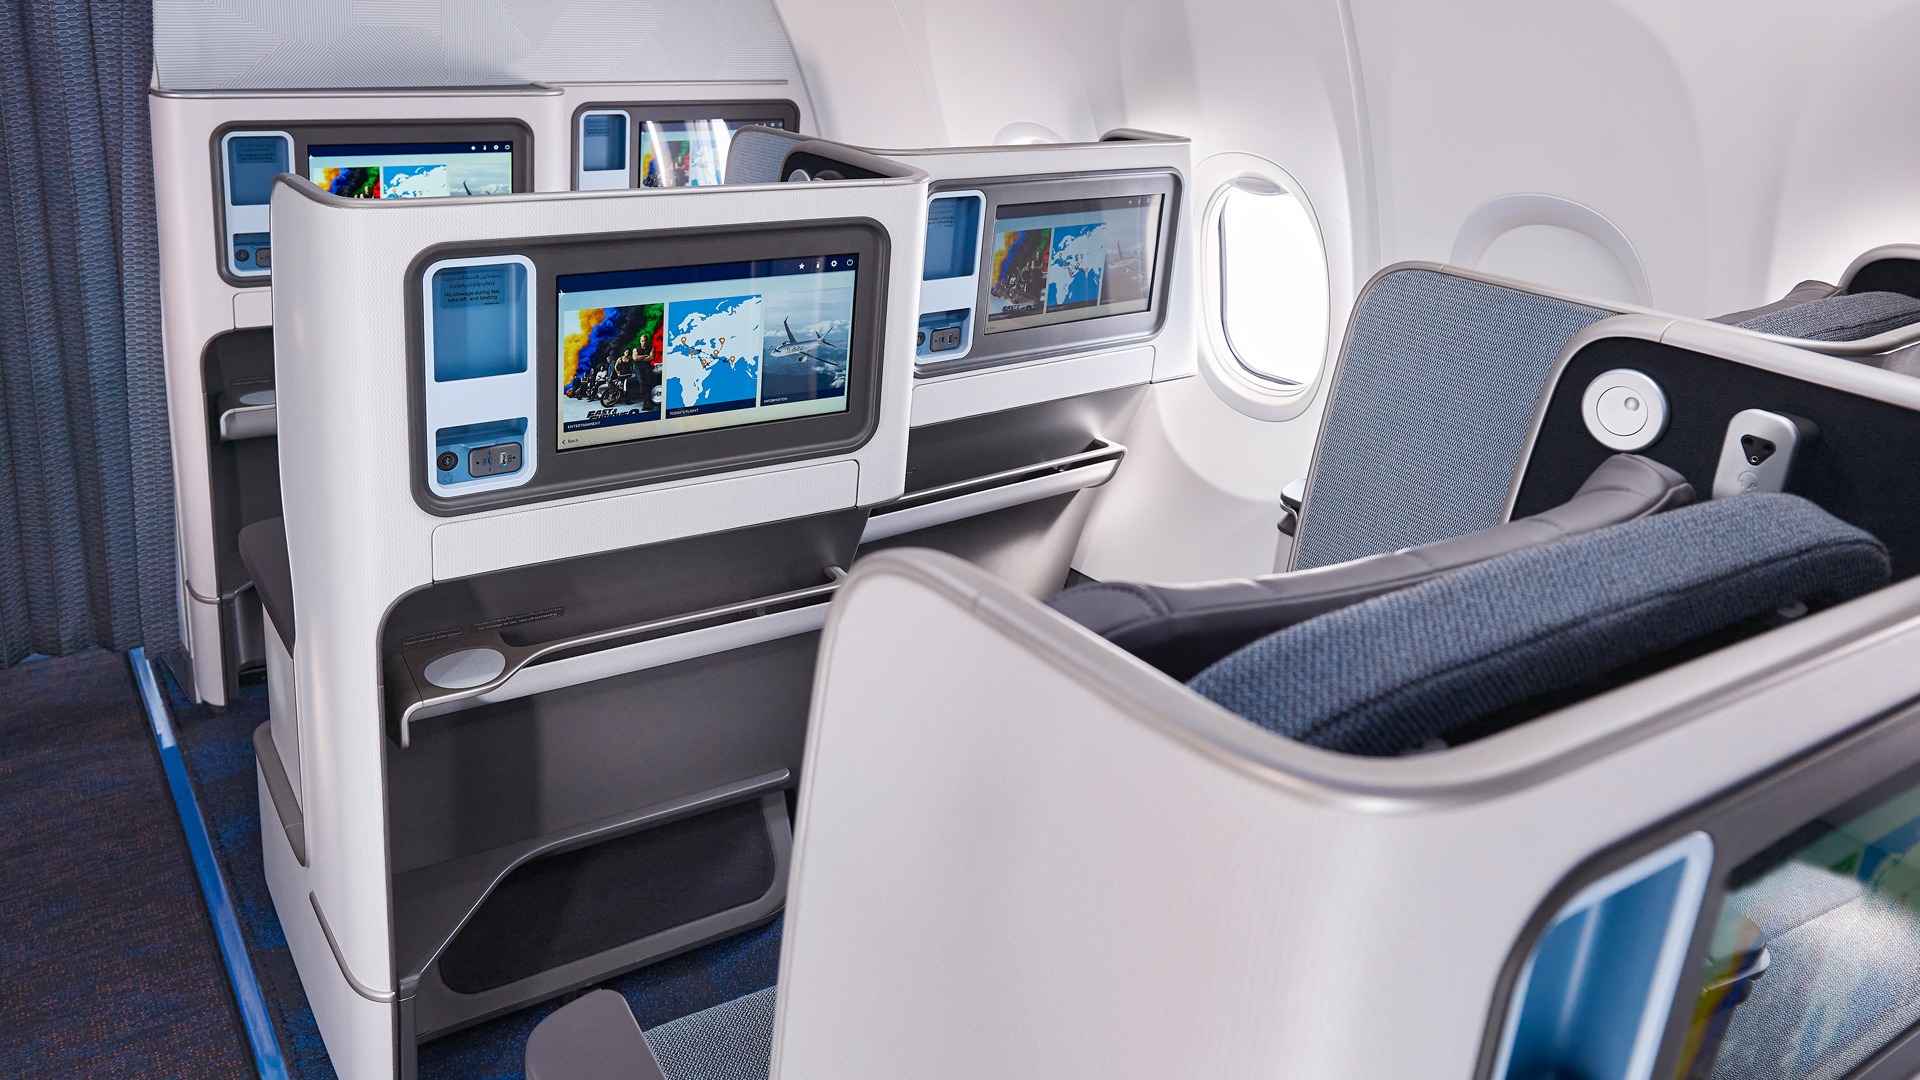 Flydubai Showcases Its New Business Class Seat Offering At Arabian Travel Market 0254